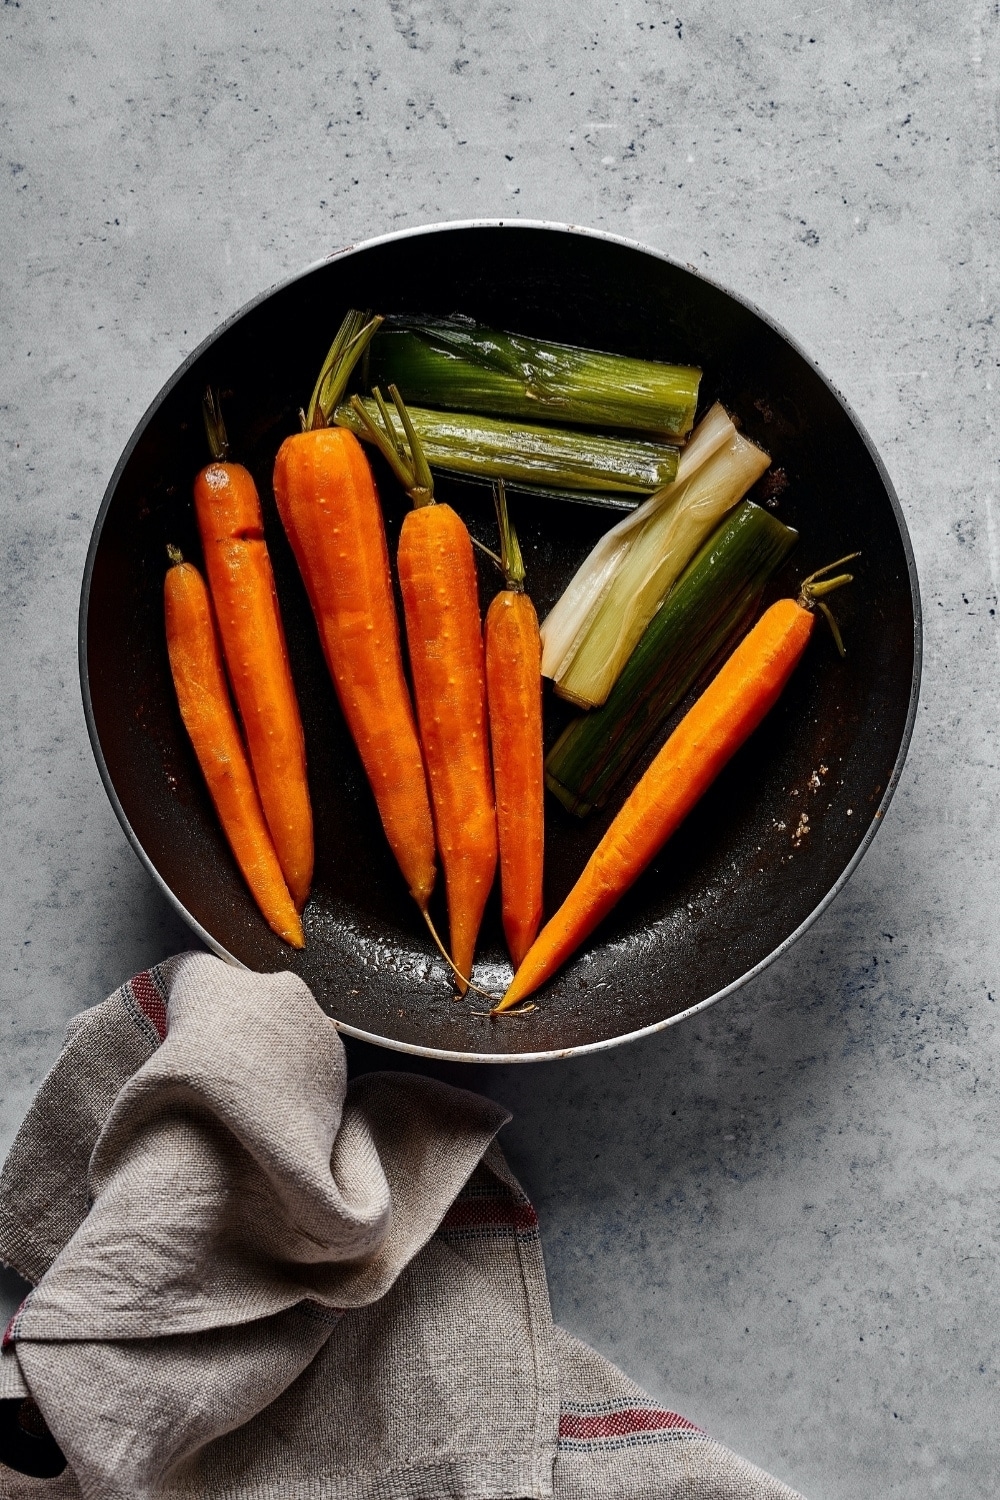 A skillet on a gray counter with carrots and leaks in it.